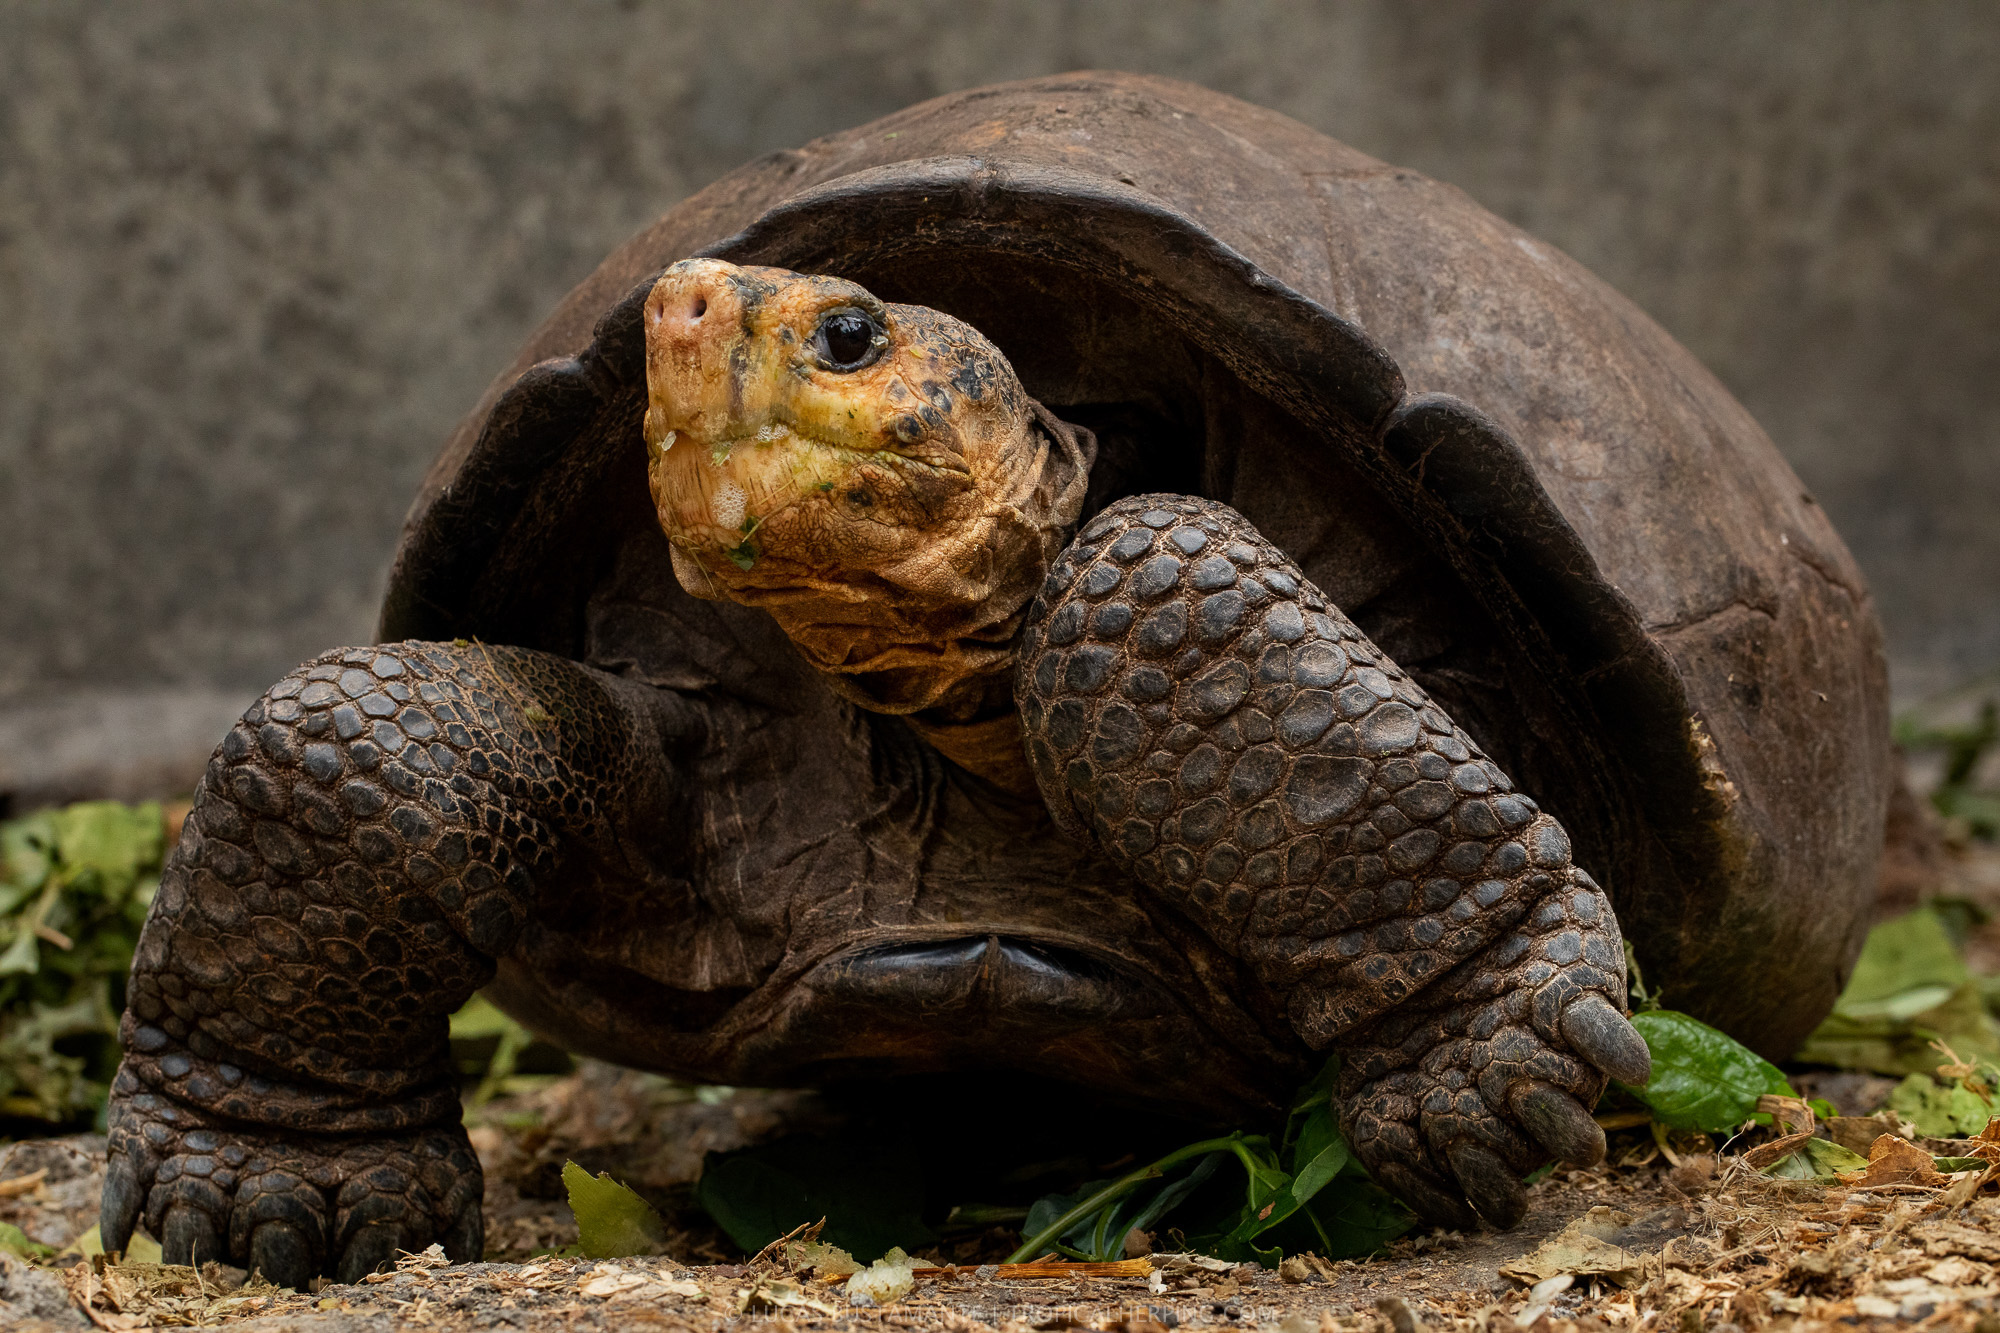 Fernandina Giant-Tortoise (Chelonoidis phantasticus) female, nicknamed Fern, photographed in the Giant Tortoises breeding center in Santa Cruz, Galapagos Islands. It is the only extant specimen of the species.

It was found by a team of researchers from the Galapagos National Park and Galapagos Conservancy in 2019 during an expedition in Fernandina Island.

Photo by Lucas Bustamante (@luksth).

Please, in each post, always tag and mention the Galapagos National Park (@parquegalapagos), Galapagos Conservancy (@galapagosconservancy), and Lucas Bustamante as the photographer (@luksth).

--

Tortuga Gigante de Fernandina (Chelonoidis phantasticus).

Foto crédito: Lucas Bustamante (@luksth)

Para Instagram y Twitter siempre mencionar y etiquetar @luksth.